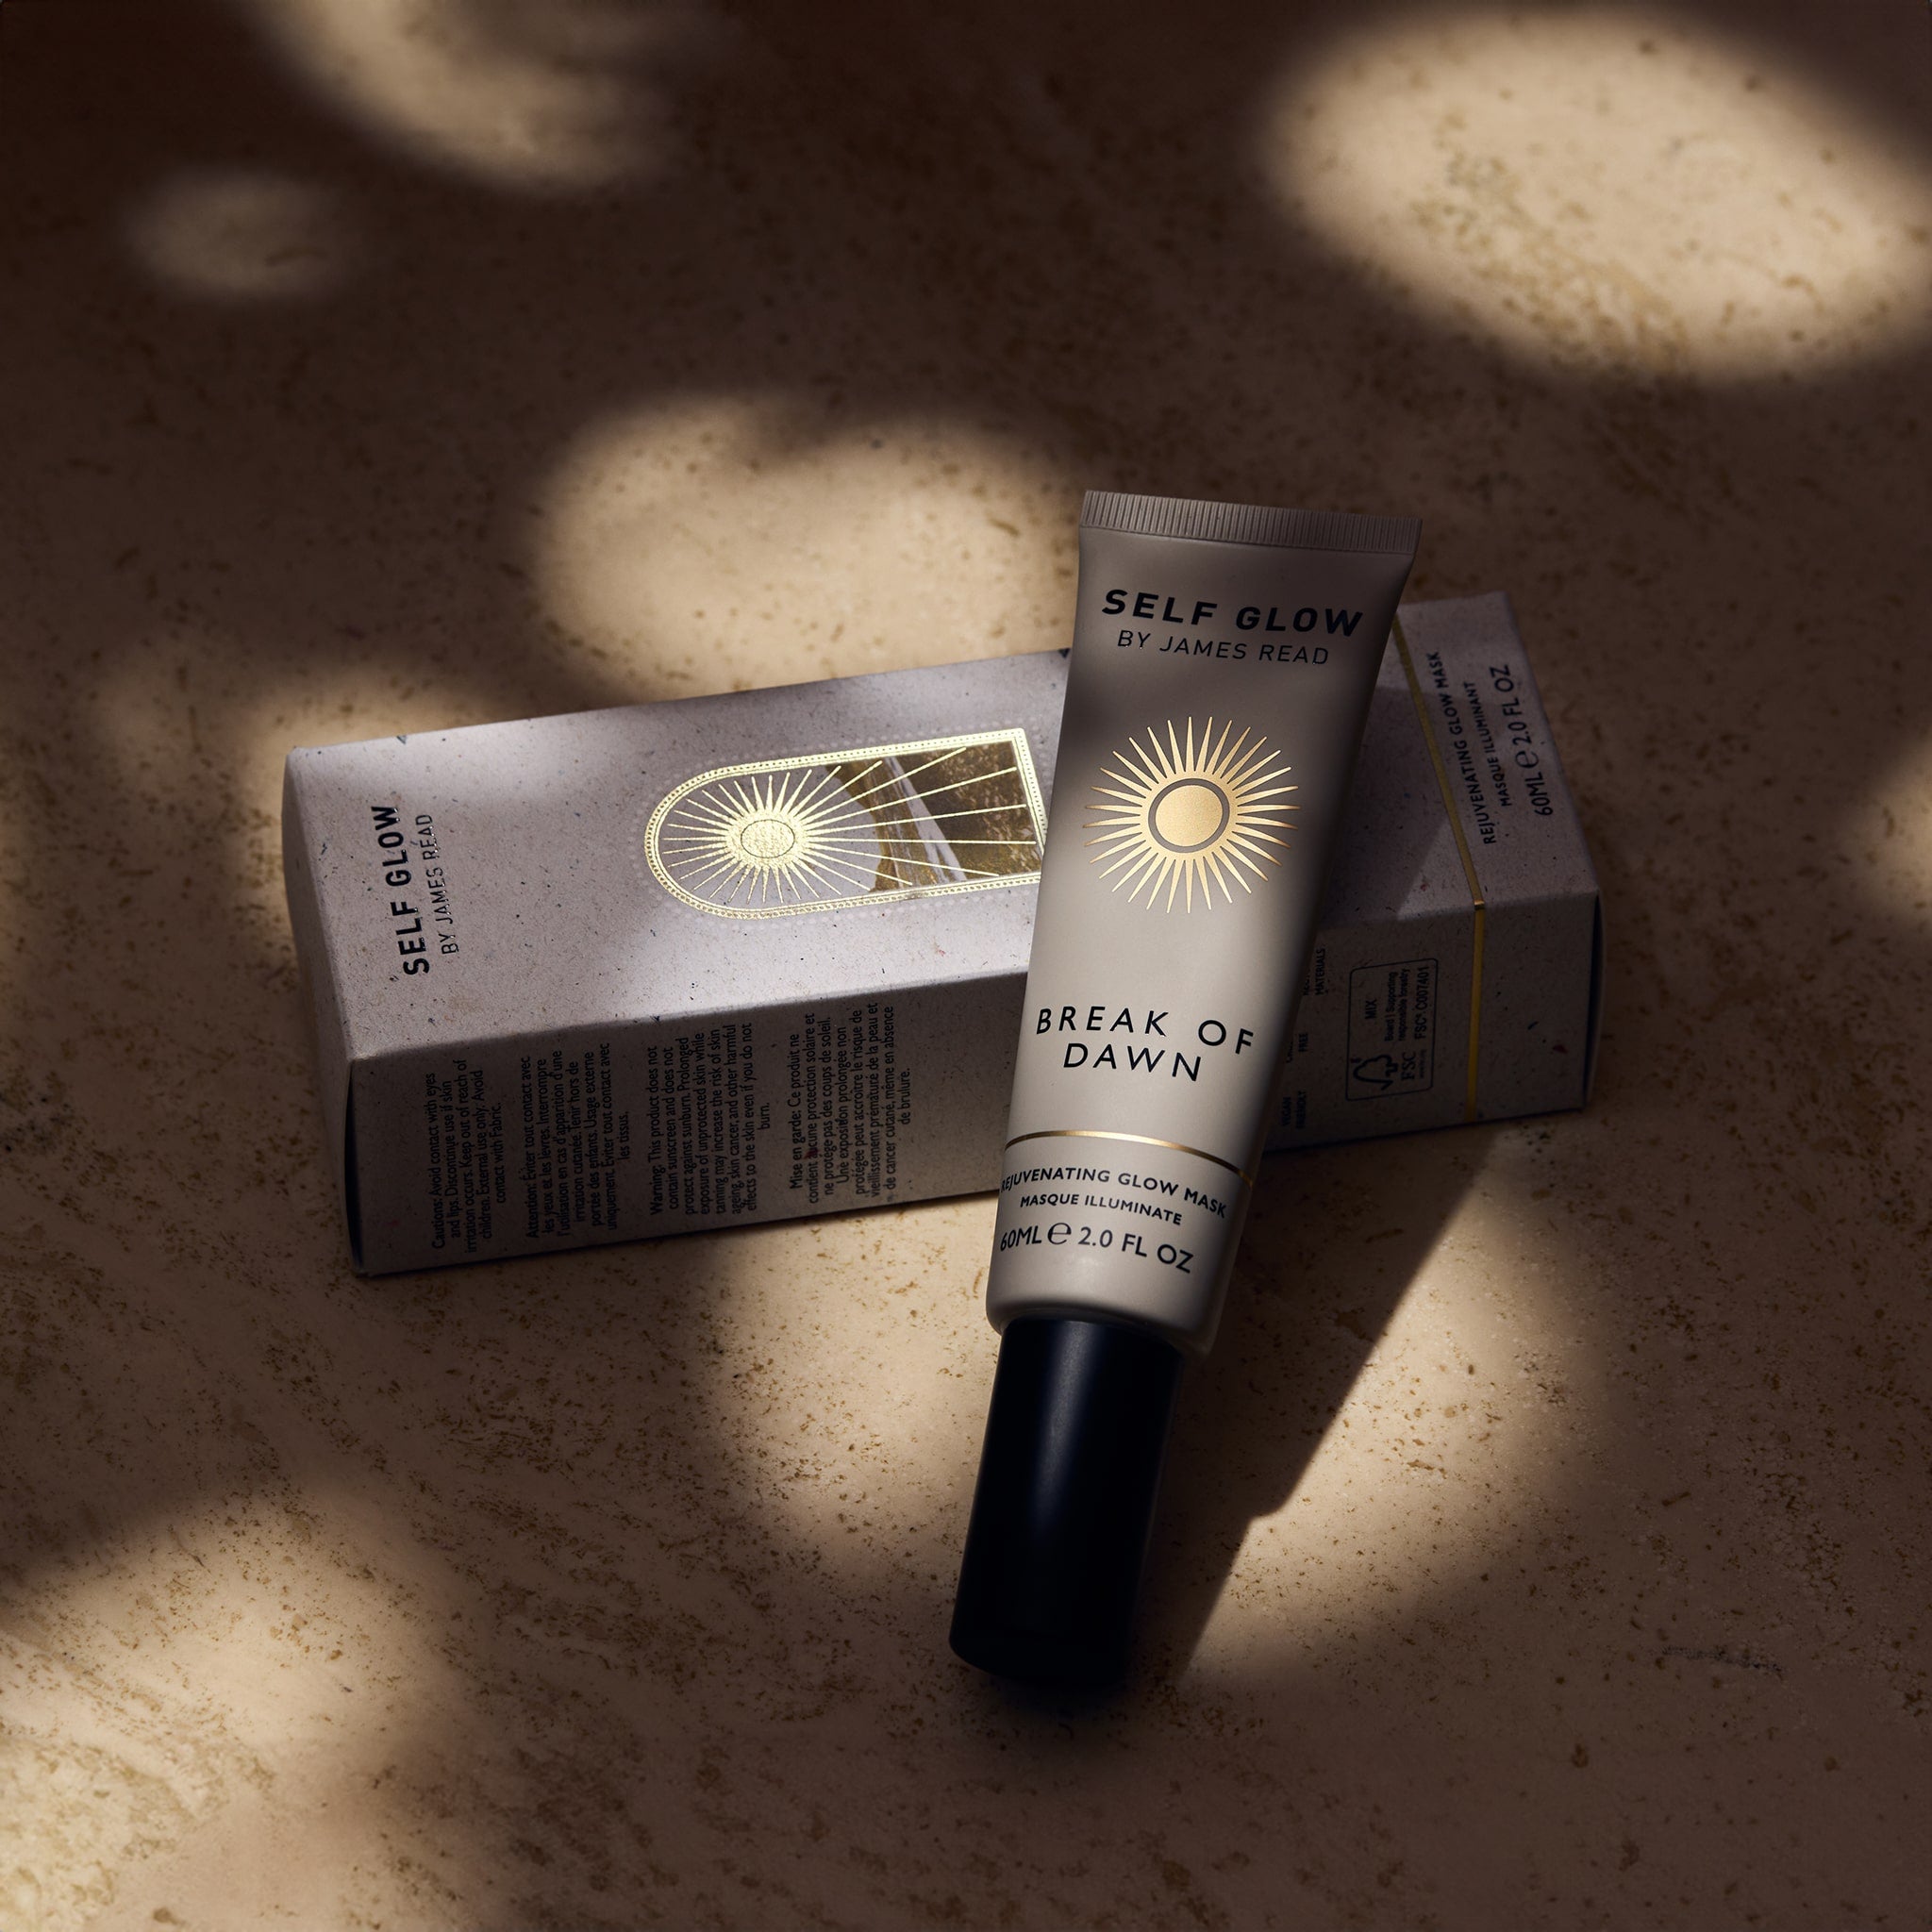 Self Glow by James Read Break of Dawn Rejuvenating Glow Mask bottle and box in a lifestyle image with dappled light, showcasing the product's radiance-boosting properties.